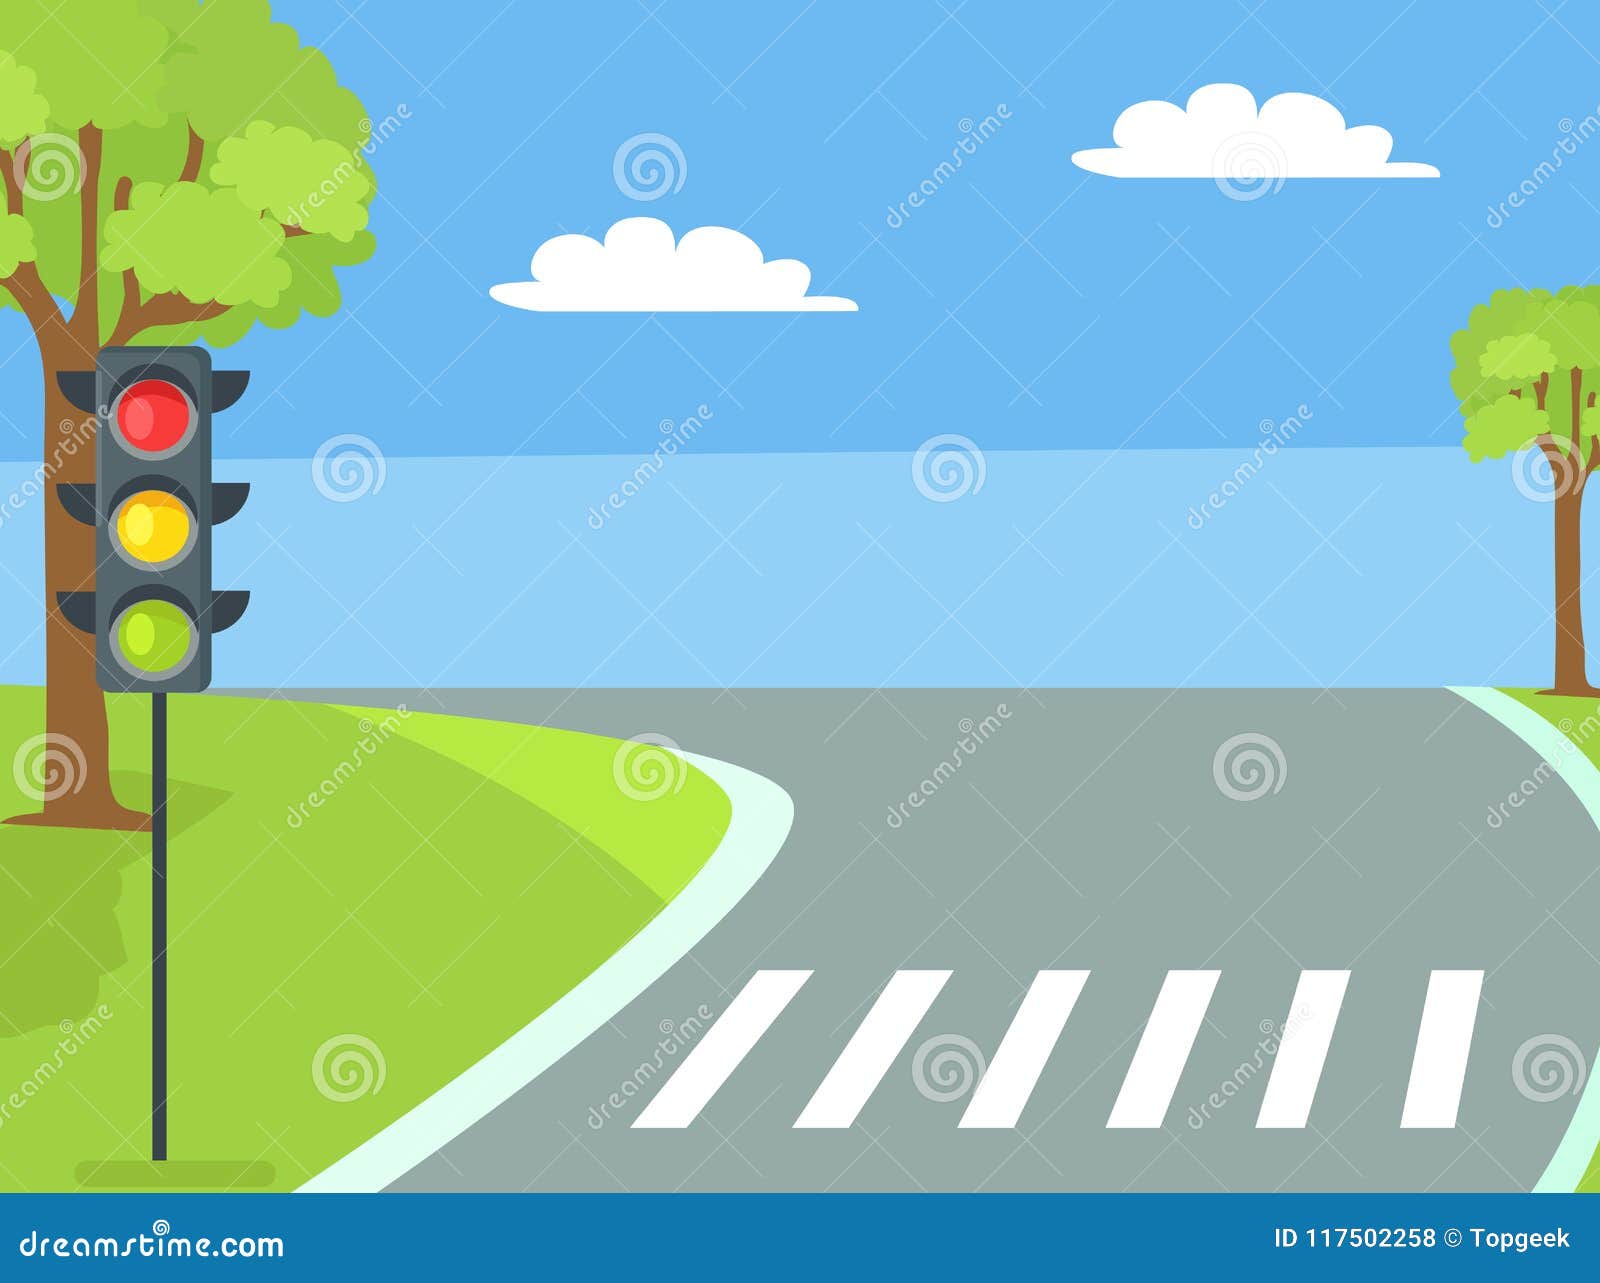 pedestrian crossing with traffic light and road